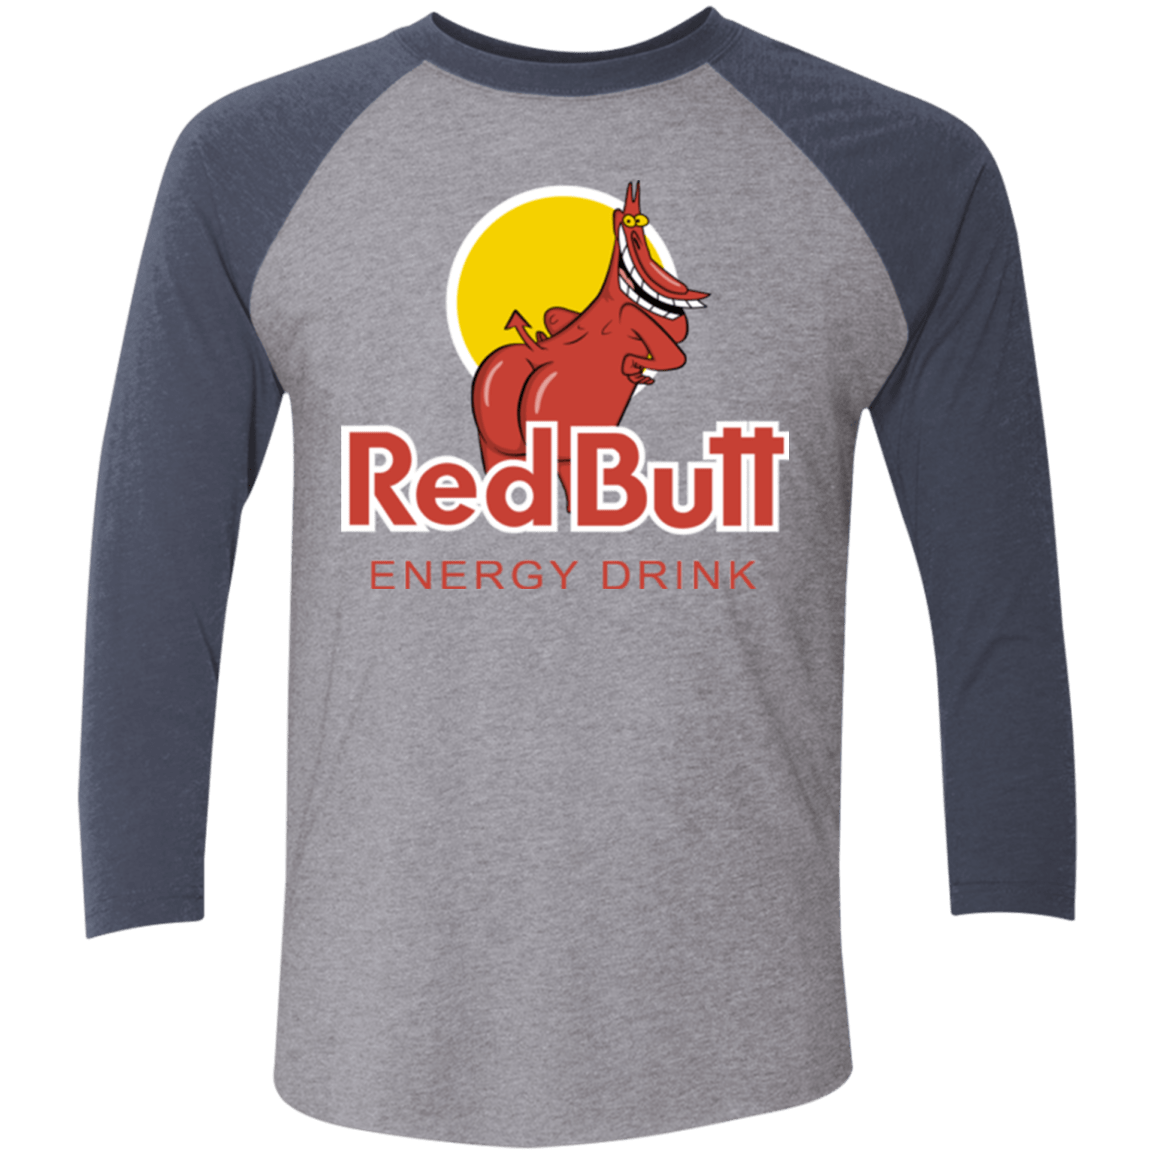 T-Shirts Premium Heather/ Vintage Navy / X-Small Red butt Men's Triblend 3/4 Sleeve